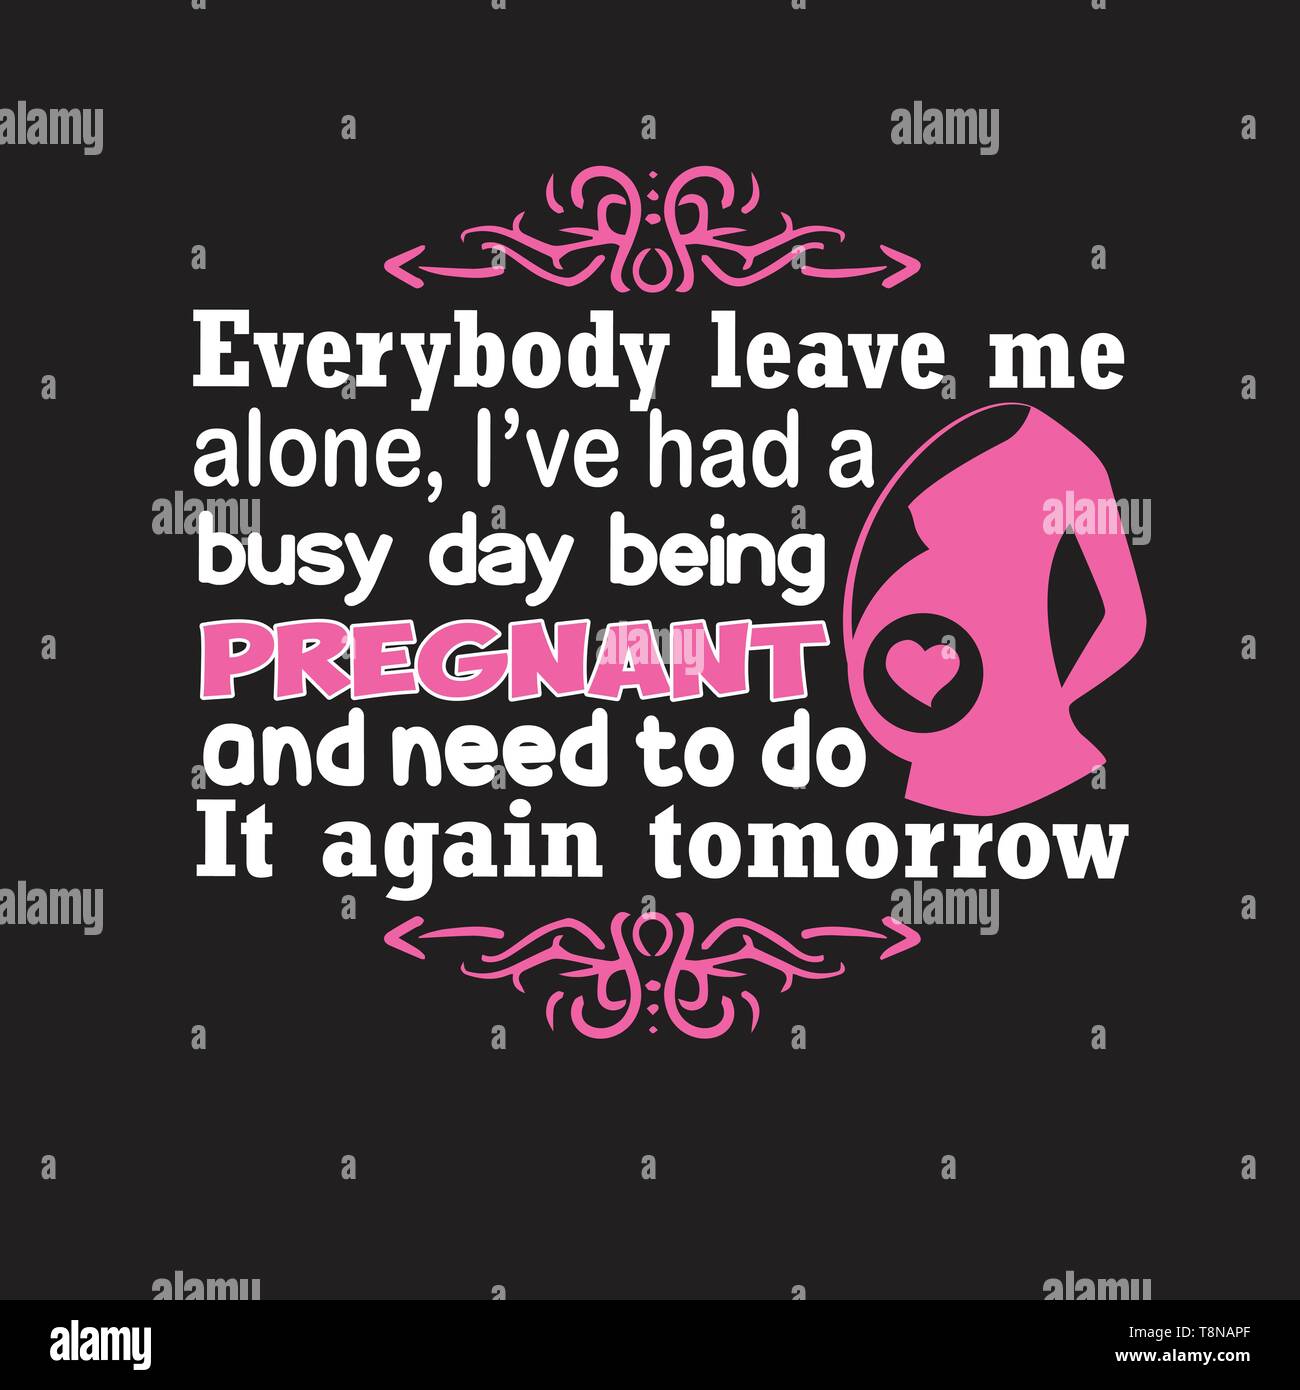 Pregnant Quote and saying. Everybody leave me alone Stock Vector ...